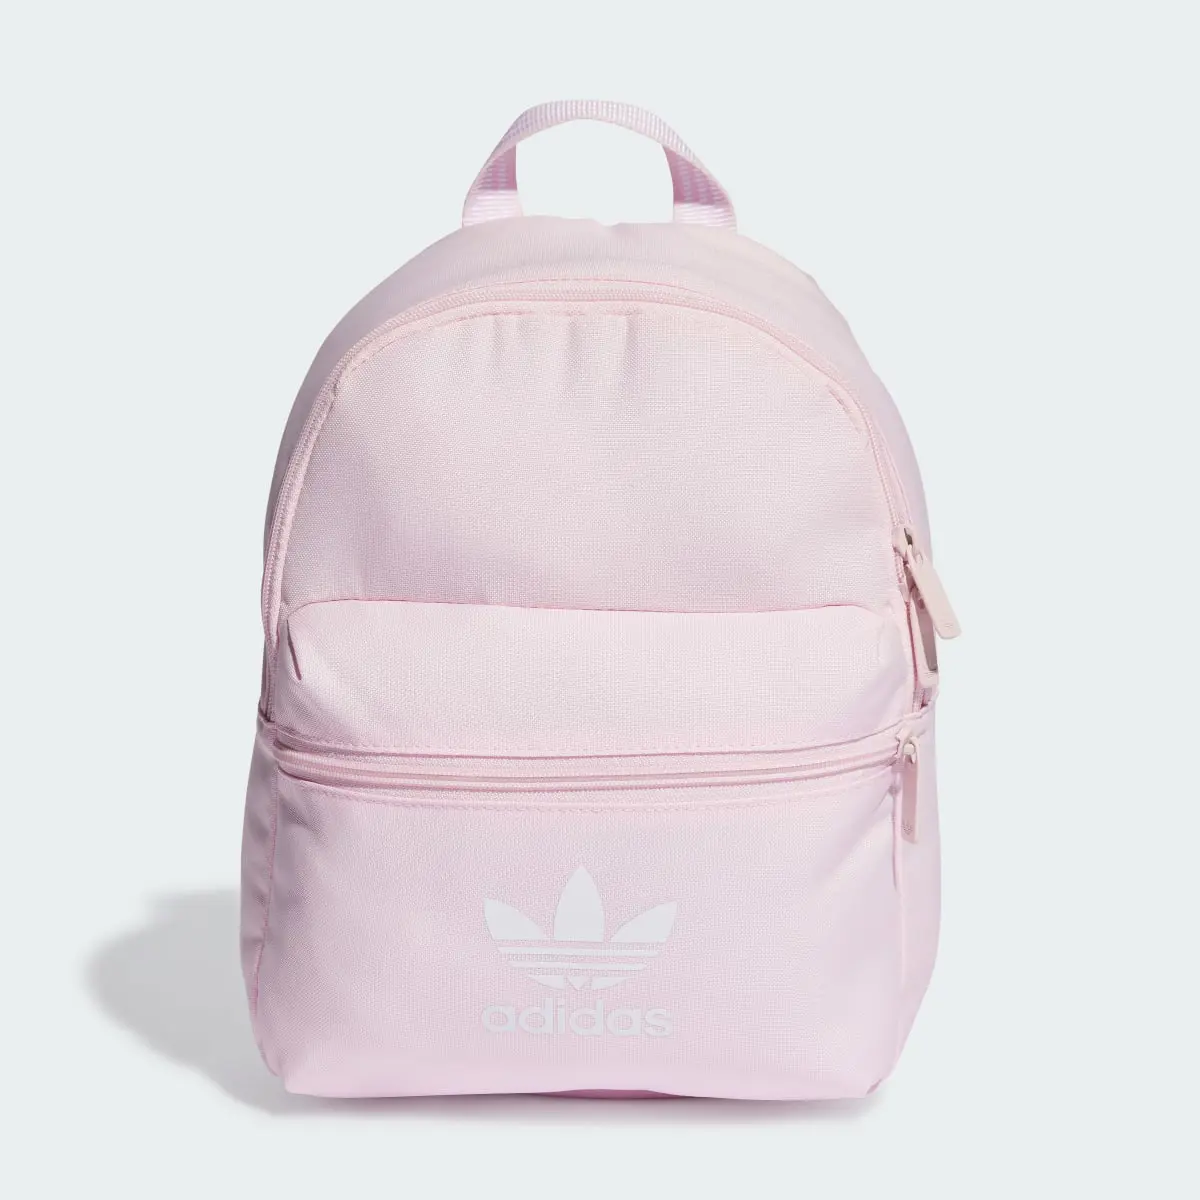 Adidas Small Adicolor Classic Backpack. 2